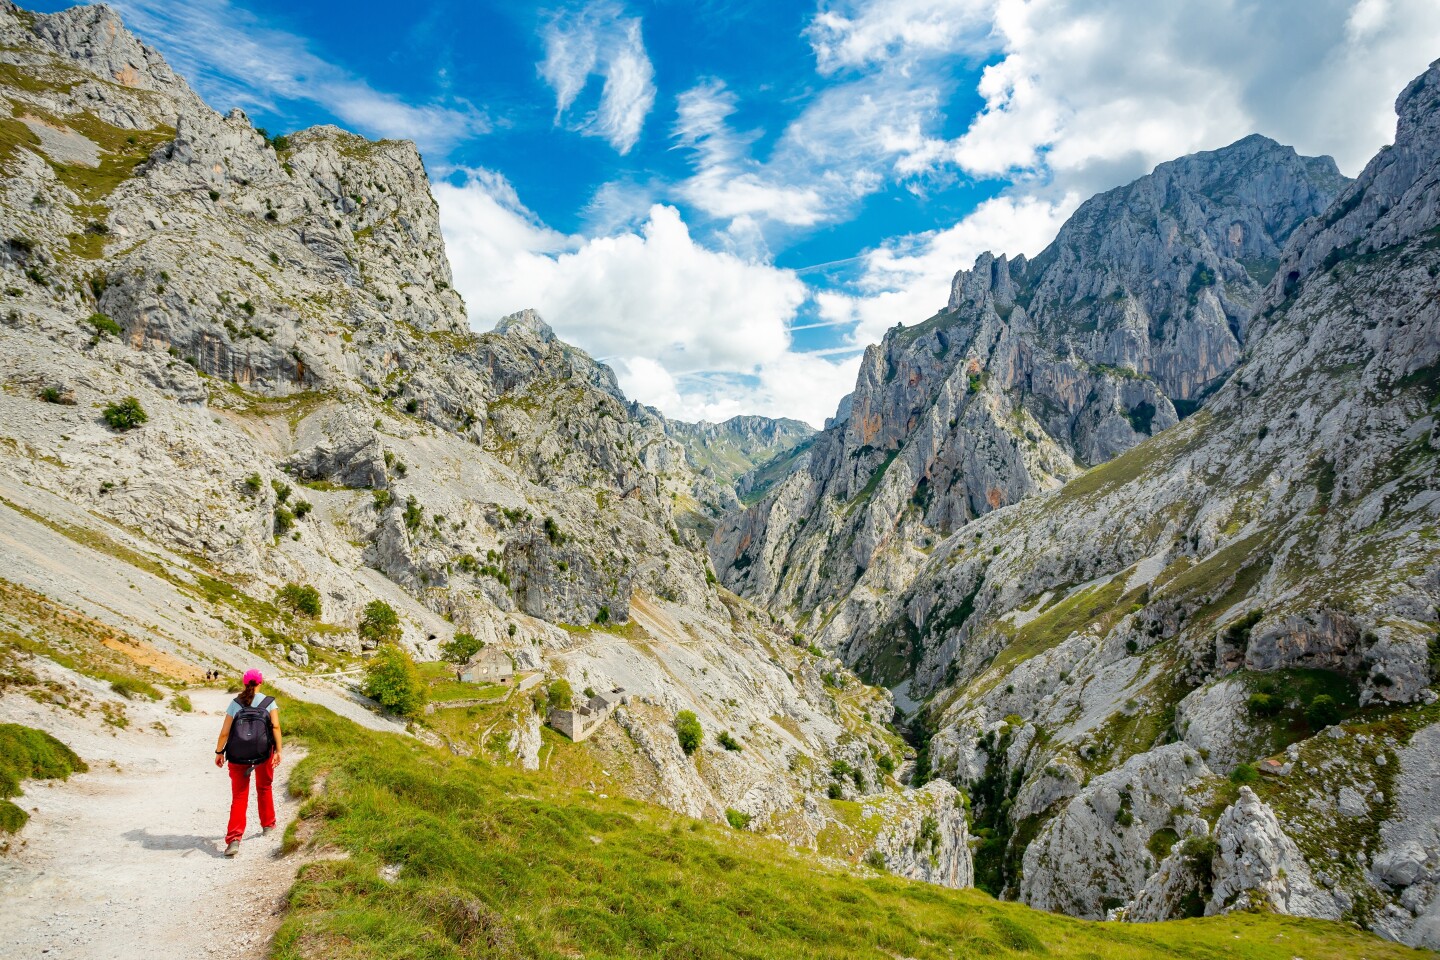 <h2>5. Picos de Europa National Park</h2> <p><i>Asturias, Cantabria, Castile and León</i></p> <p>While lounge-worthy stretches of beach characterize Spain’s south, Picos de Europa National Park is a prime example of the green, dramatic landscapes that dominate the north. The 250-square-mile national park was the first established by the Spanish government in 1918 and includes alpine peaks, meadows, and lakes that feel similar to landscapes of the Pacific Northwest. Explore the jagged edges of the Cantabrian Mountains along the 7.5-mile long Ruta del Cares<i>, </i>or look for local wildlife like the roe deer and Egyptian vultures.</p>